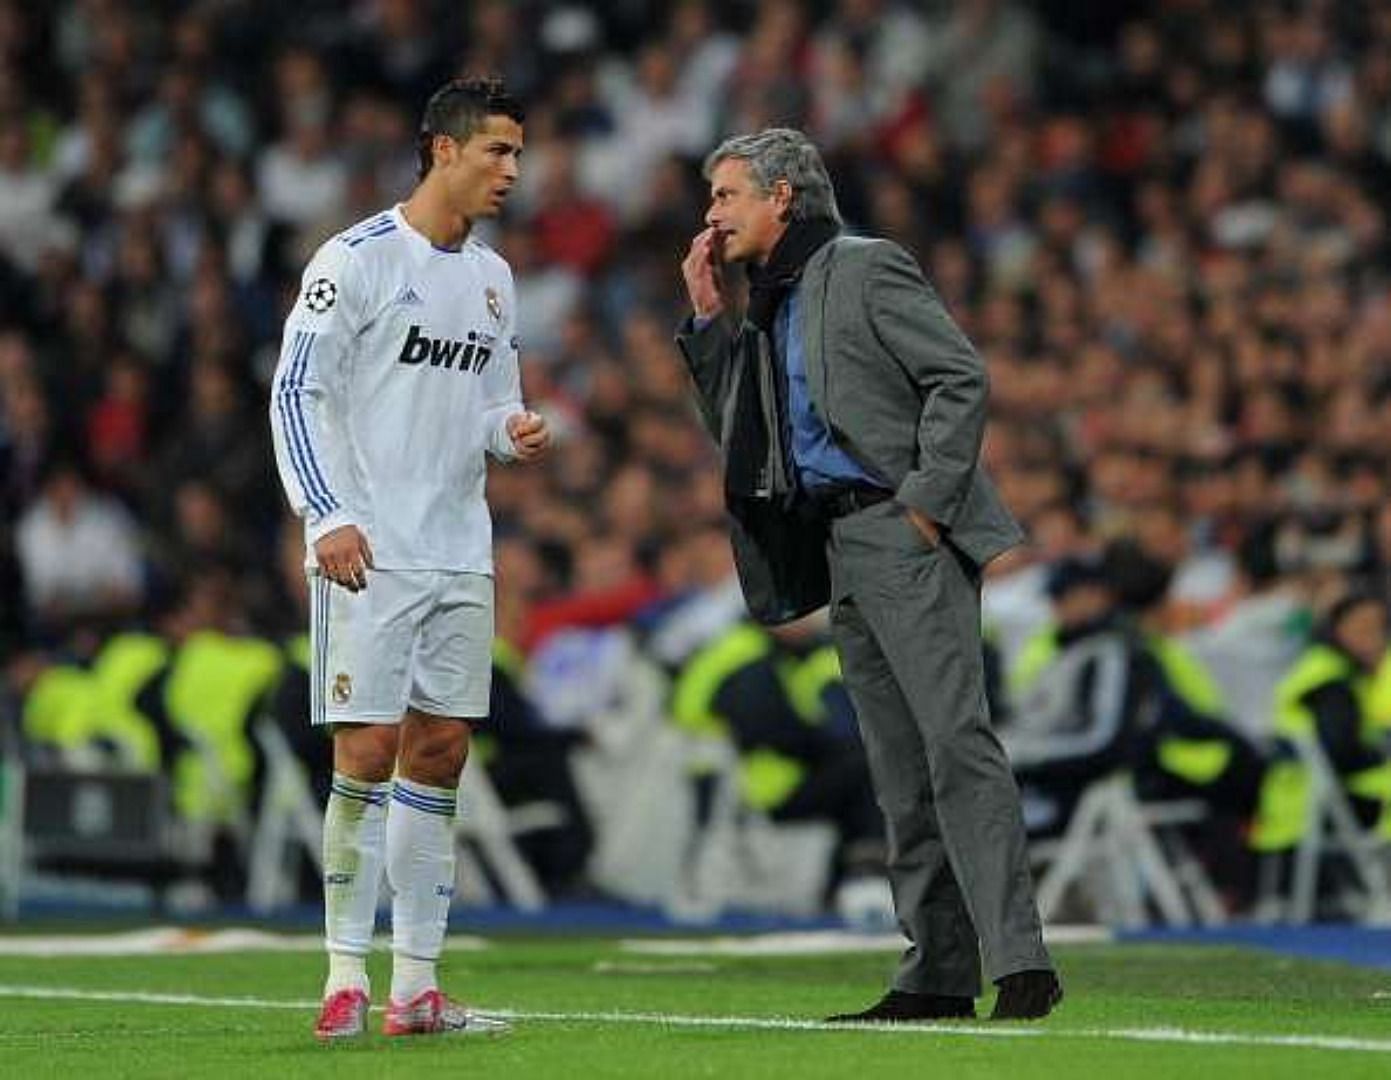 Ronaldo and Mourinho forged a partnership at Real Madrid for four years.